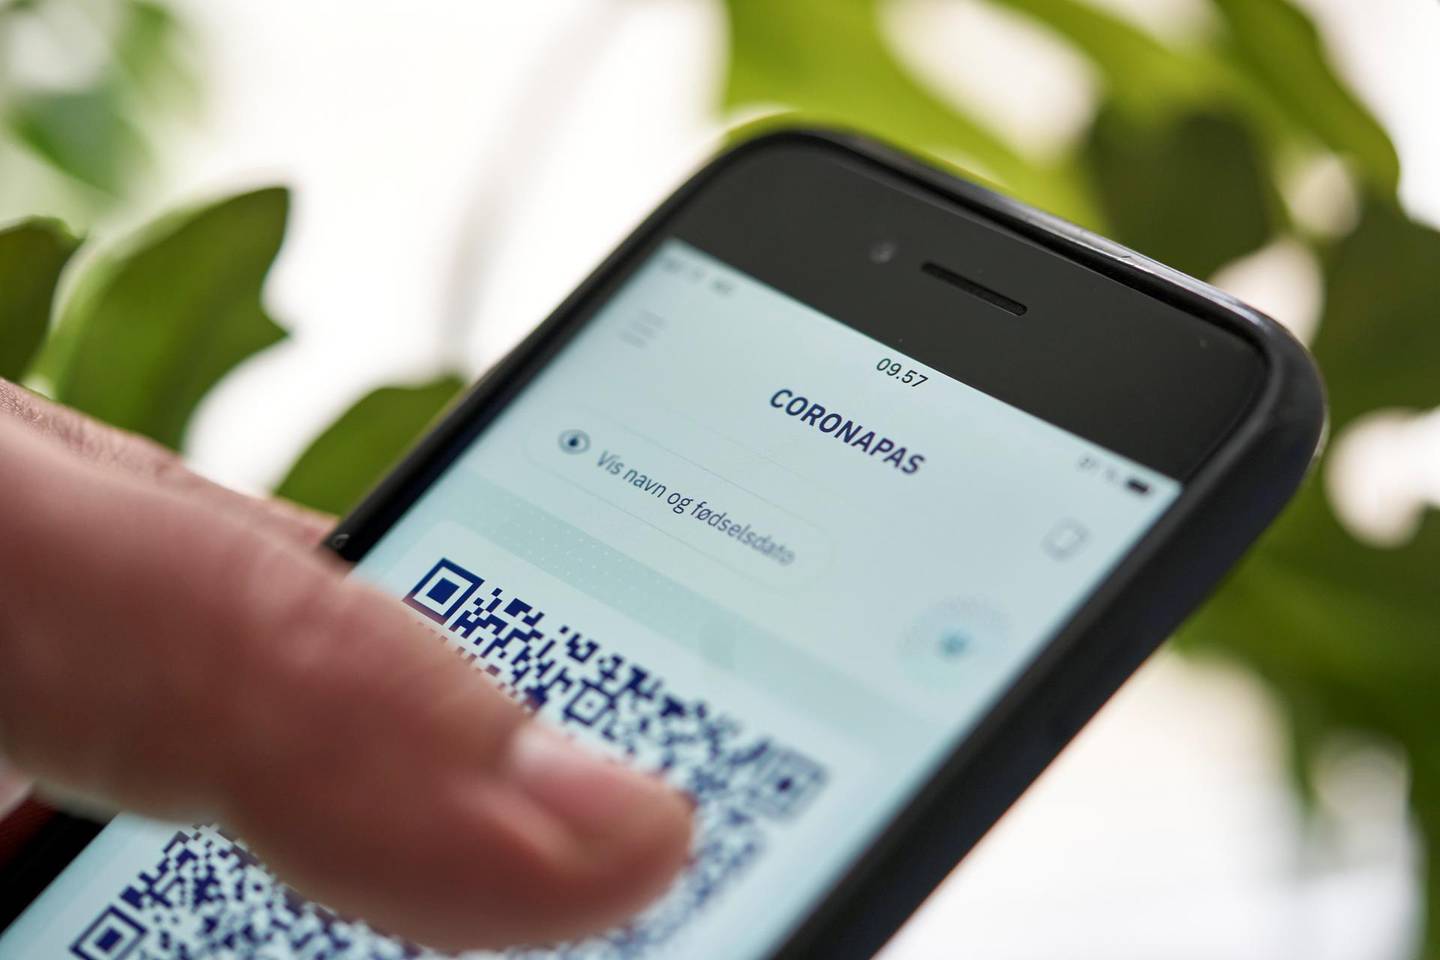 A view of a phone showing the new coronavirus passport app which can now be downloaded, in Copenhagen, Friday, May 28 2021. With the app, it is possible for the user to switch between two settings for use in Denmark and abroad, respectively, so that only the necessary information is displayed. The app can be used to document a valid coronavirus passport in both Denmark and when traveling in the EU. (Signe Goldmann/Ritzau Scanpix via AP)